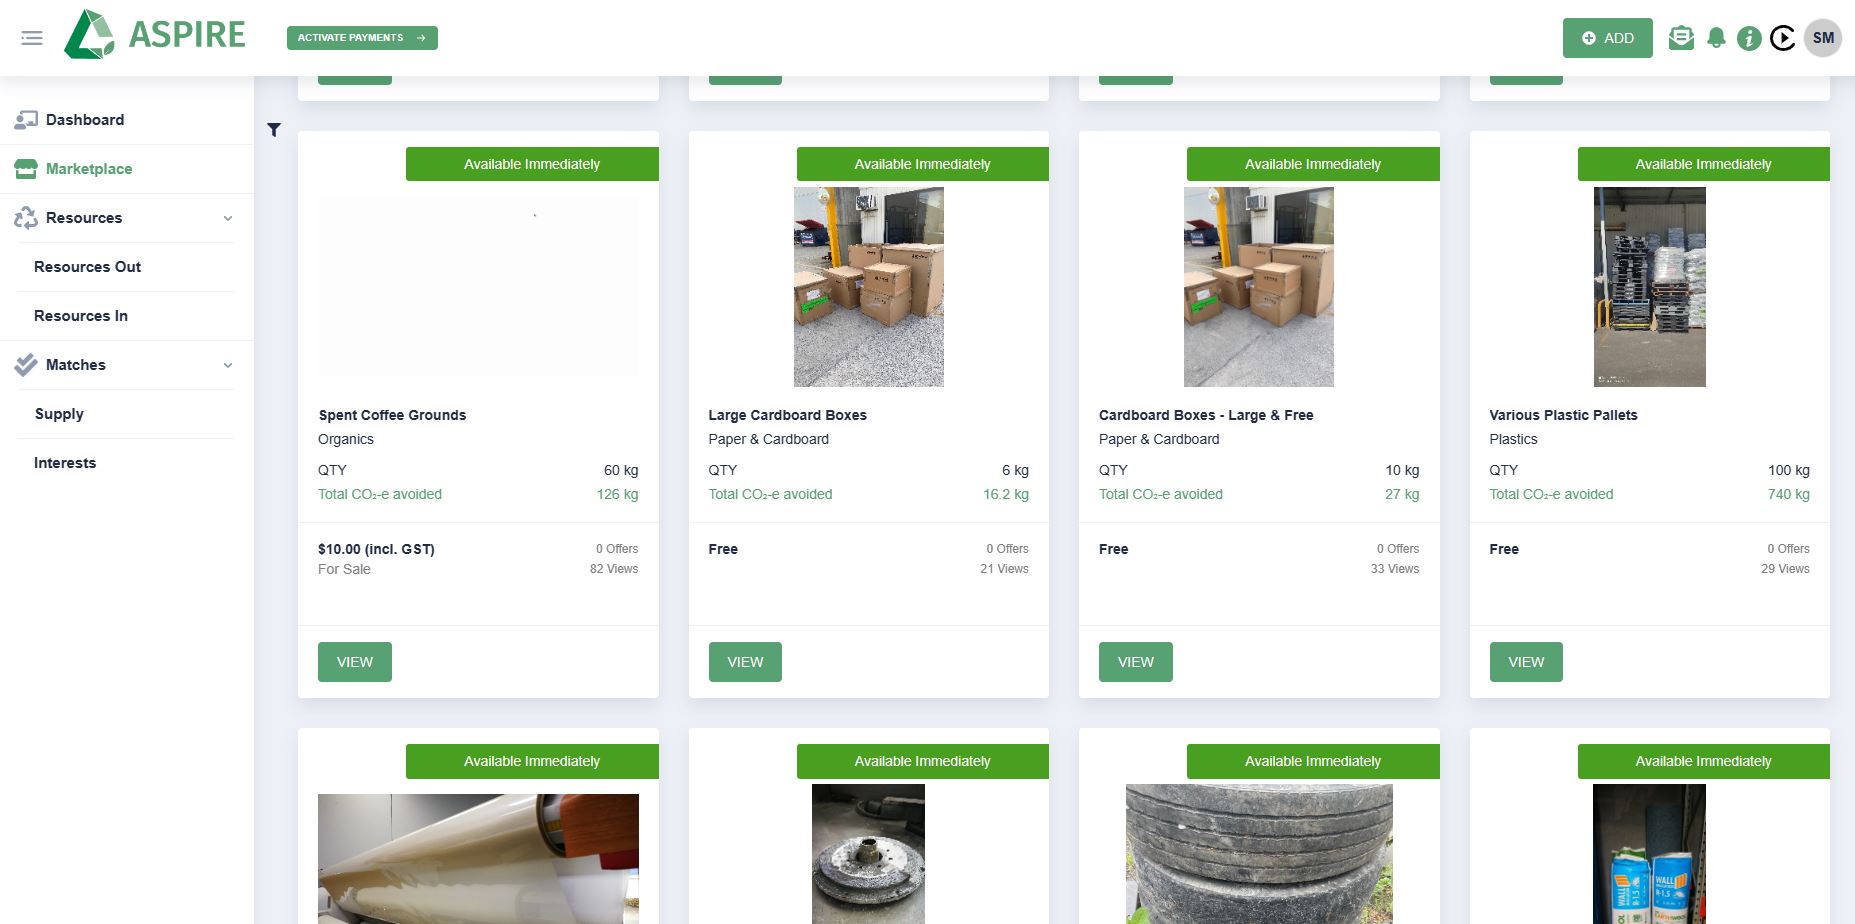 A screenshot of the ASPIRE platform marketplace with many different products listed for free or for sale.